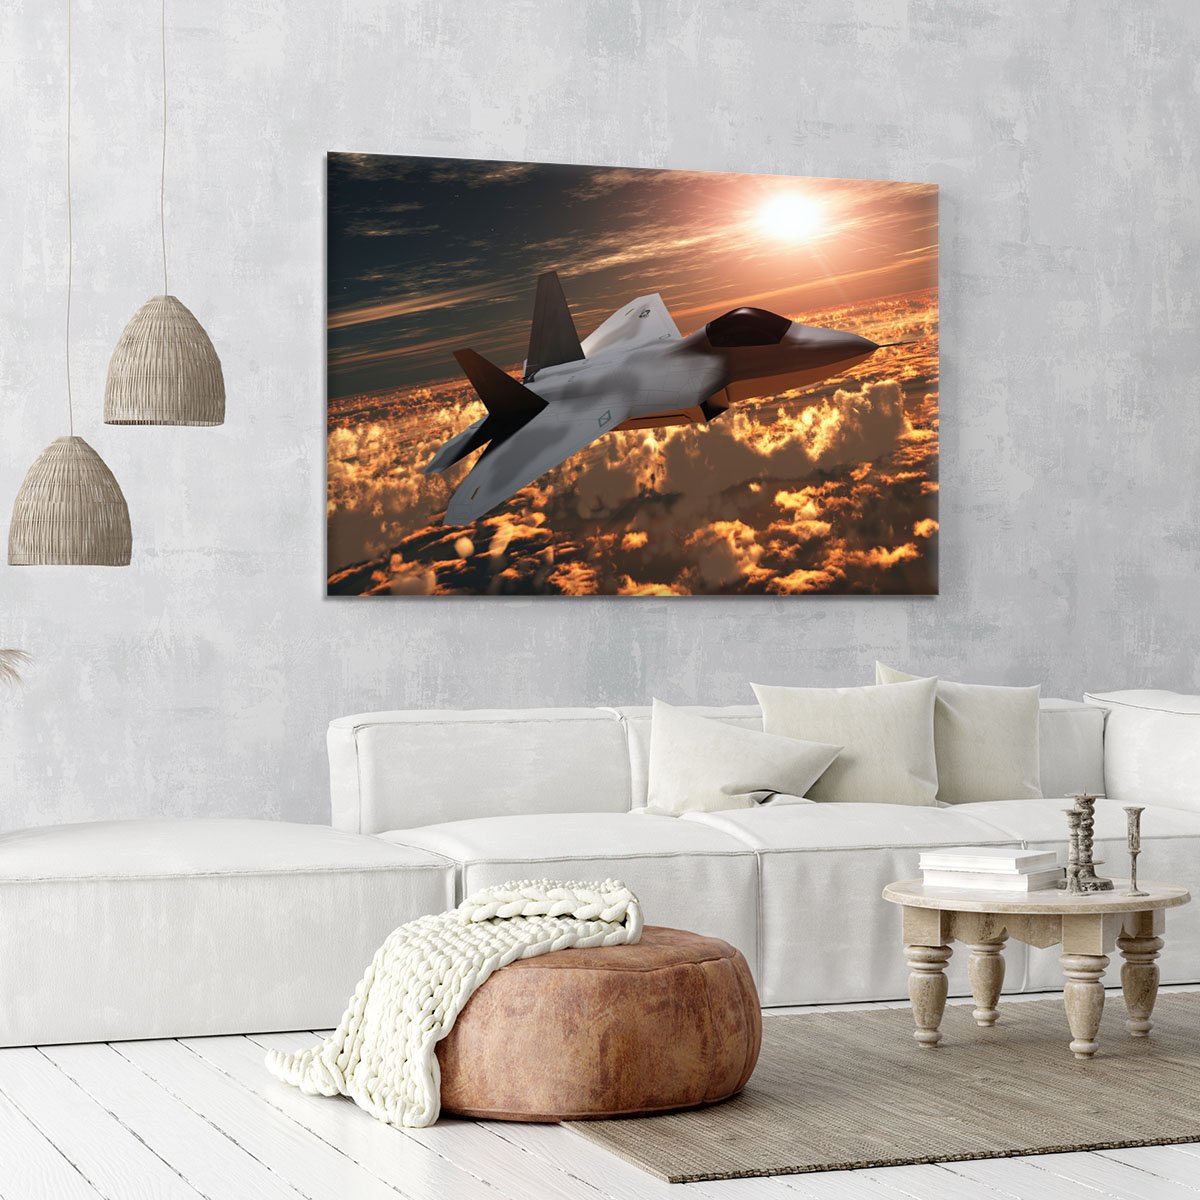 F22 Fighter Jet at Sunset Canvas Print or Poster